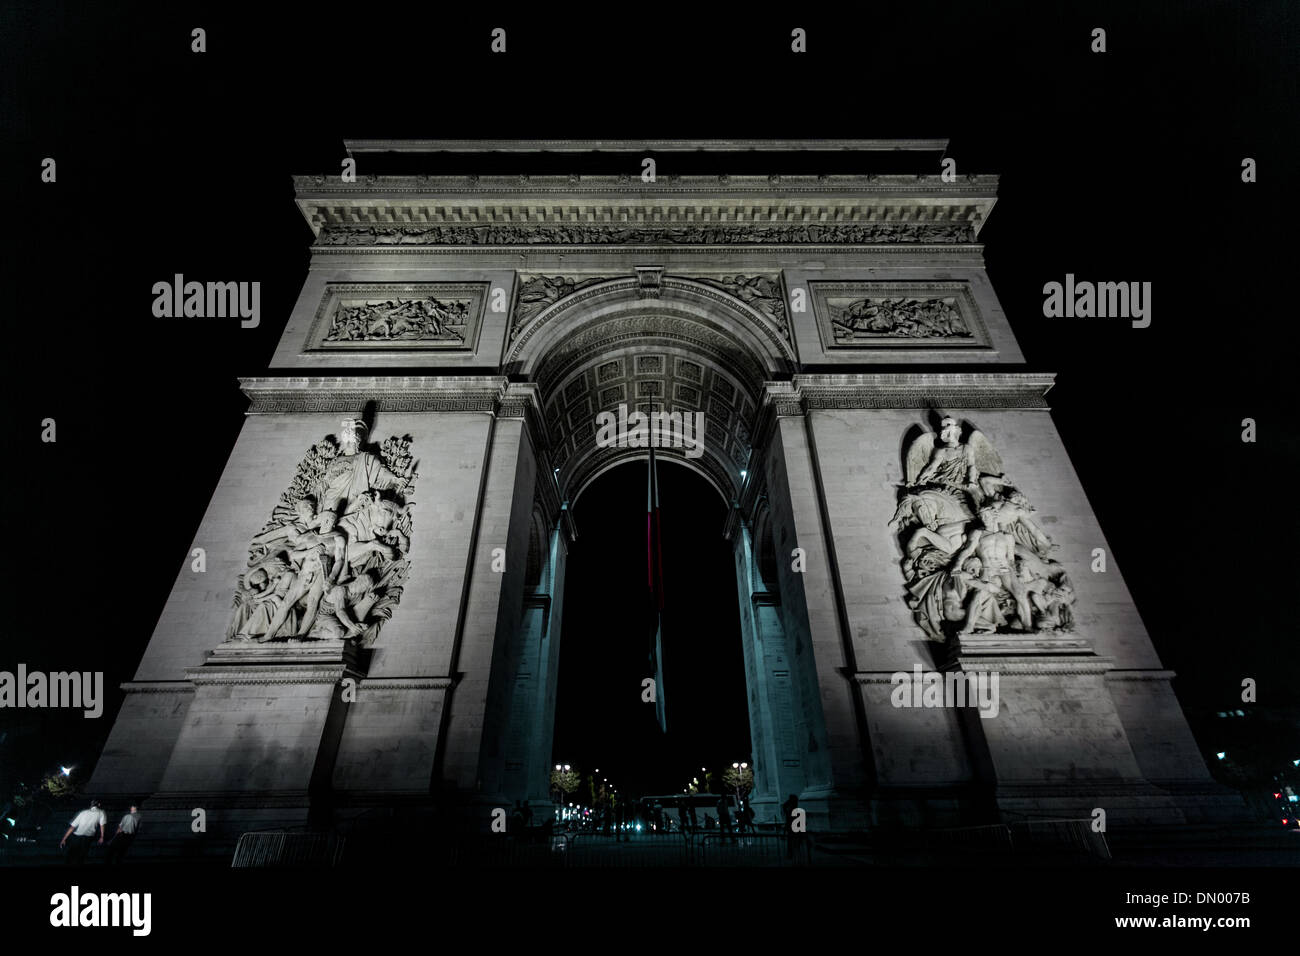 The Arc de Triomphe is one of the most famous monuments in Paris. It stands in the centre of the Place Charles de Gaulle. Stock Photo